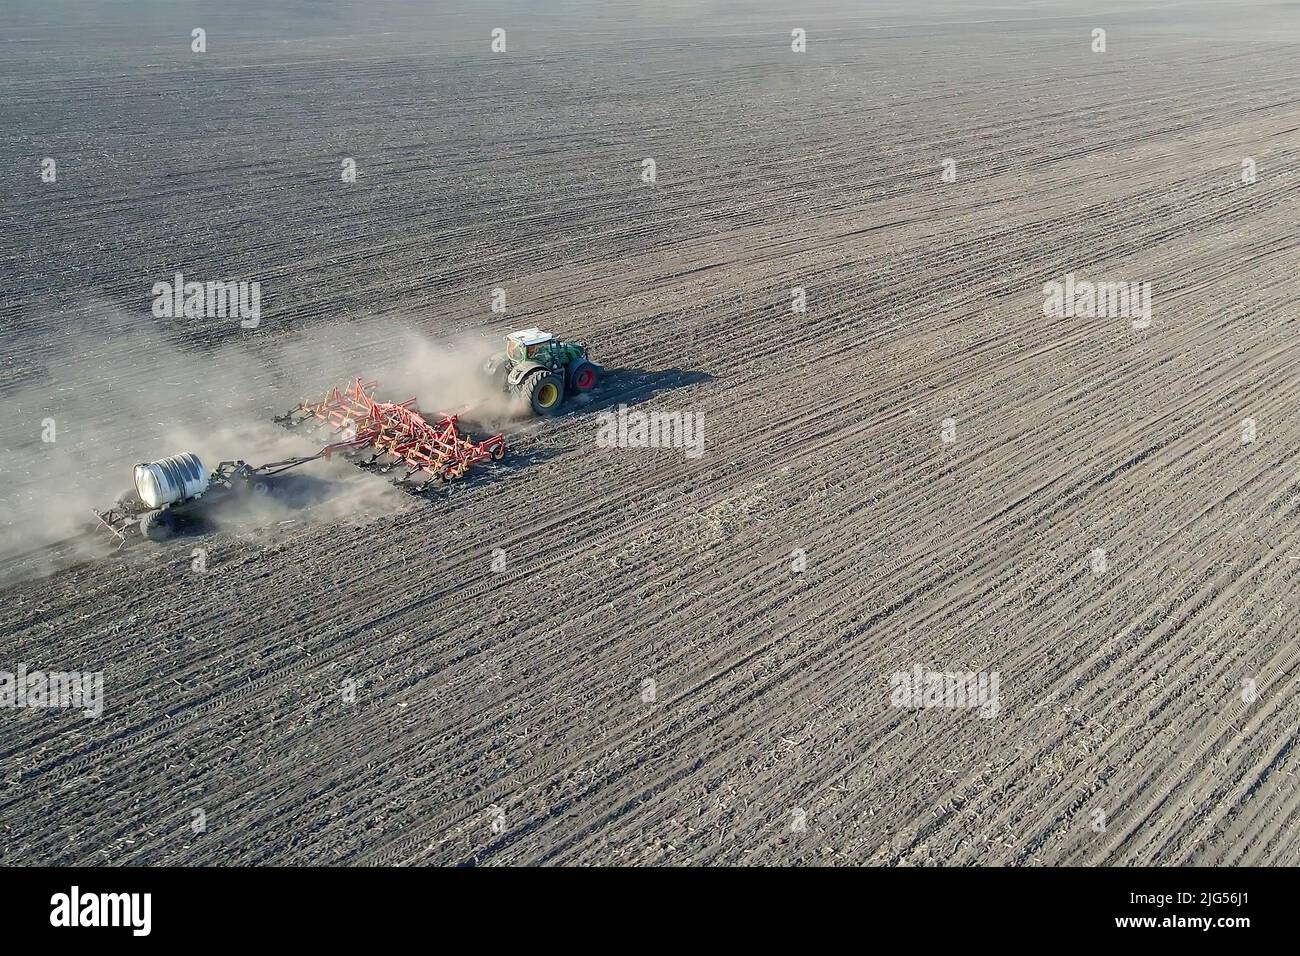 Tractor with trailed agricultural machinery plowing and apply fertilizers  Stock Photo